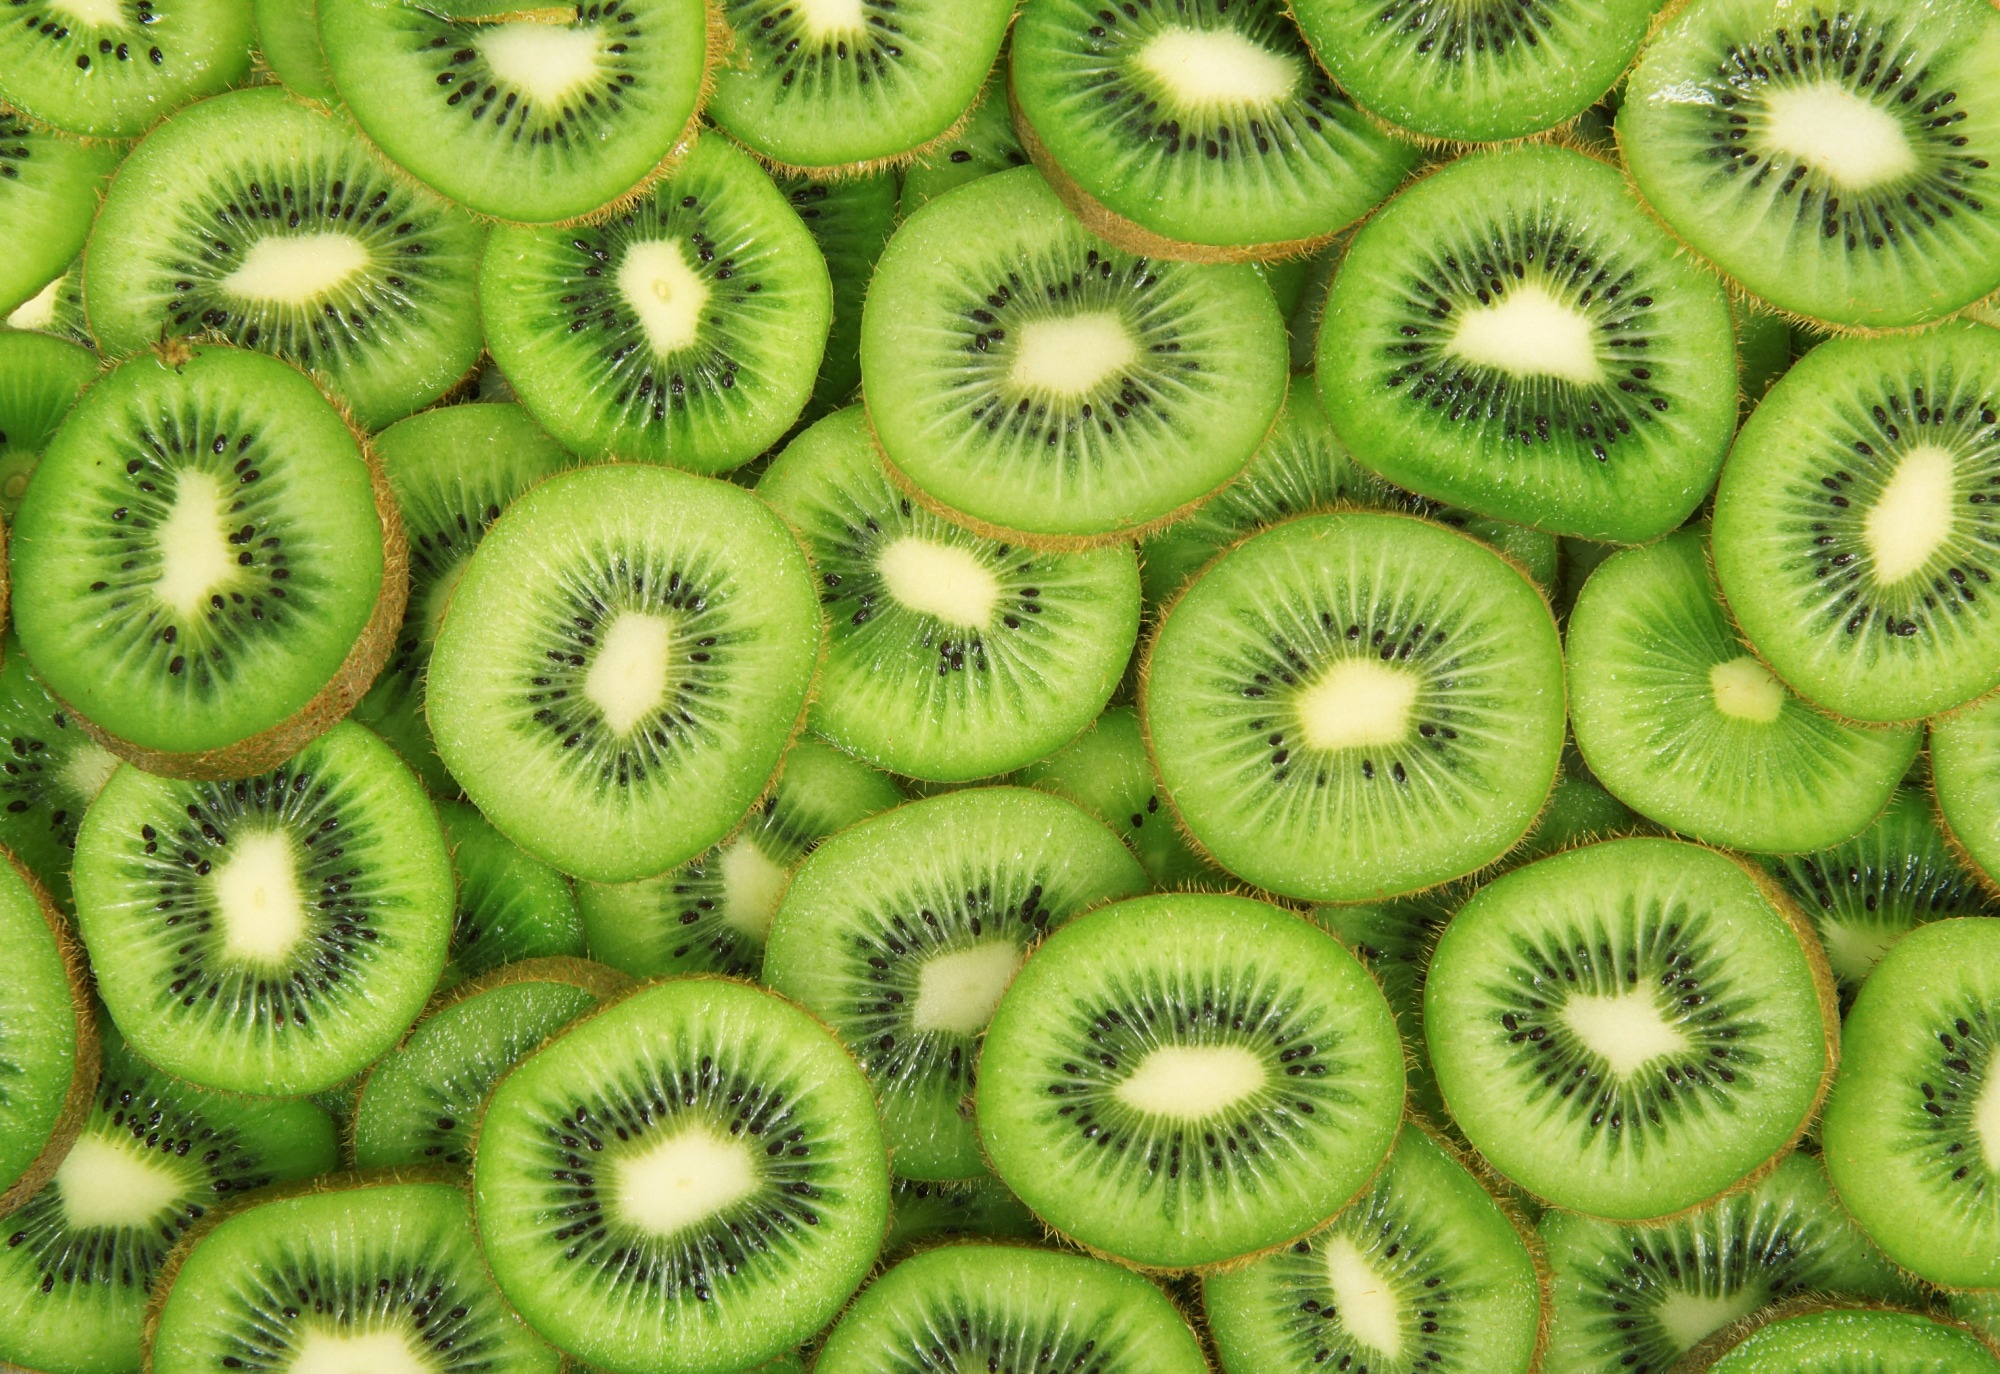 Study: Kiwifruit’s Allergy in Children: What Do We Know? Image Credit: photobeps/Shutterstock.com